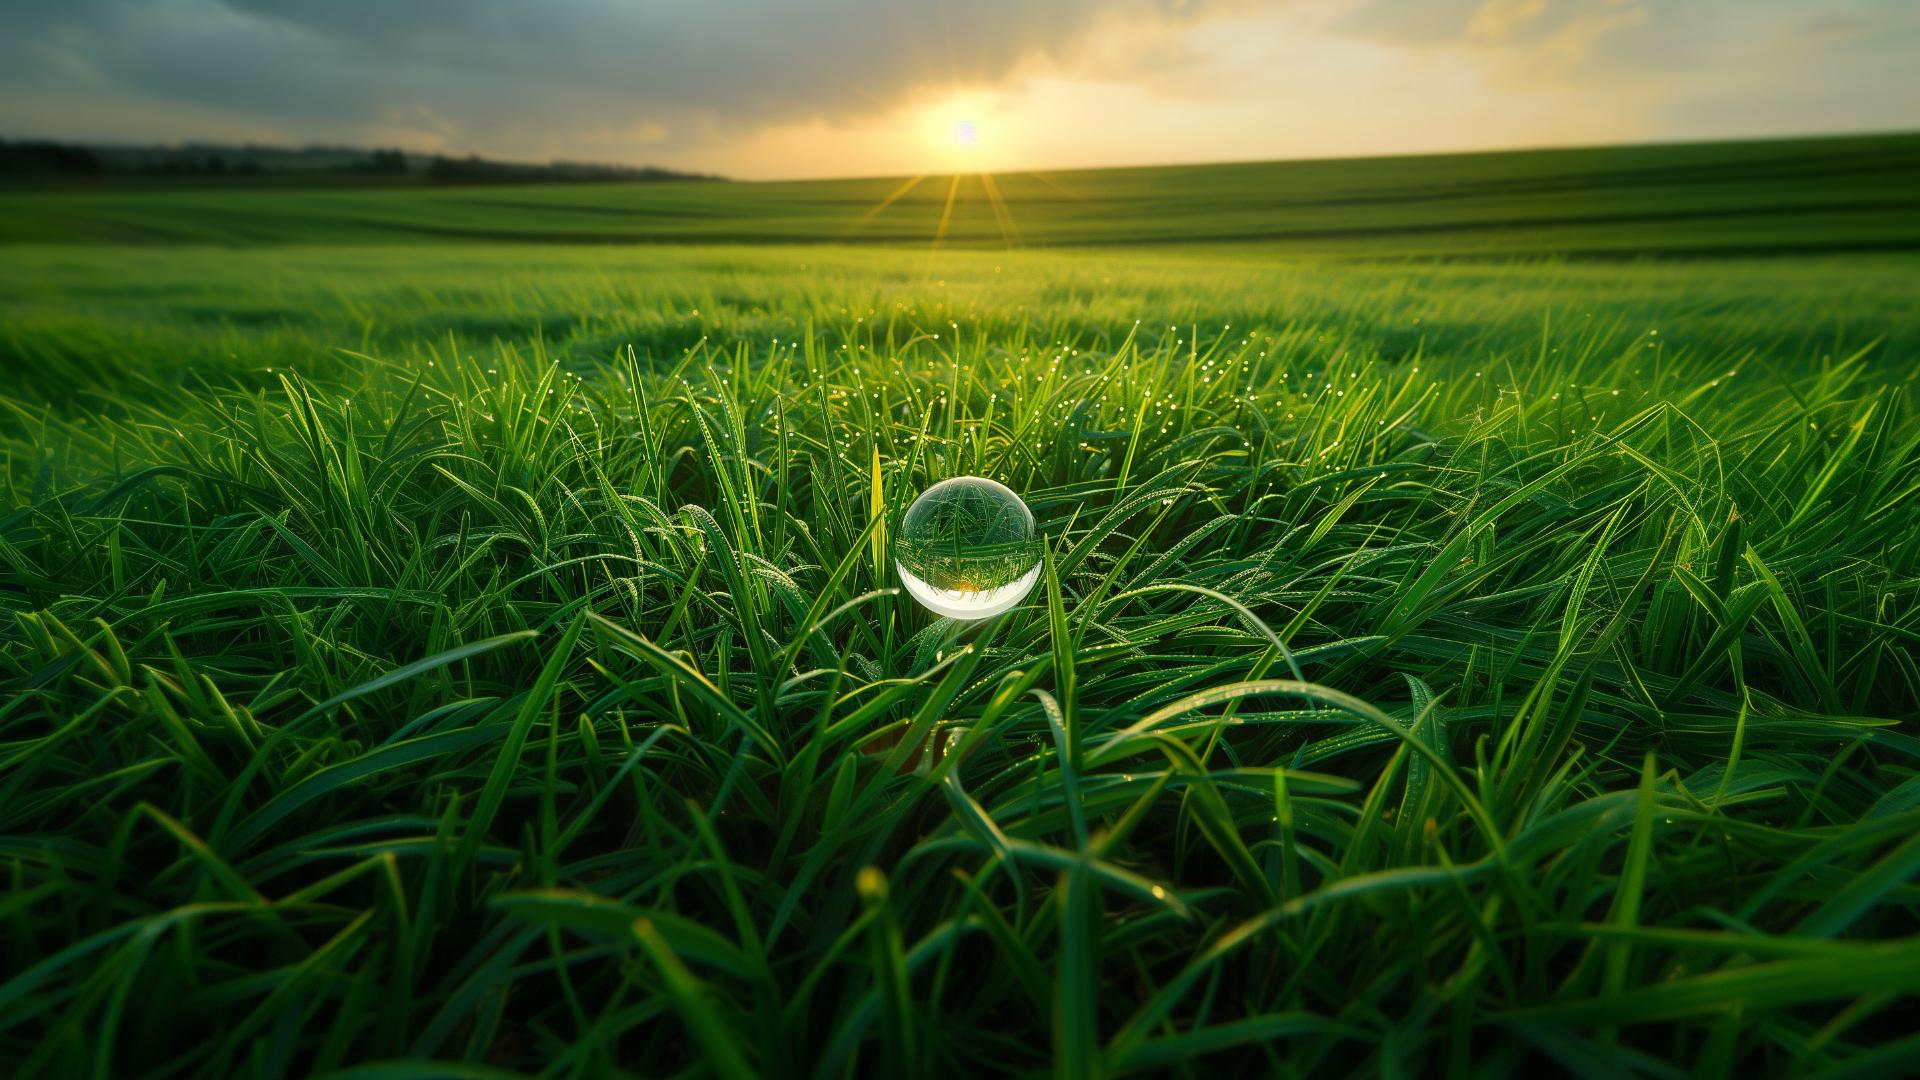 Earth Month photo illustration of drop of water on blades of grass